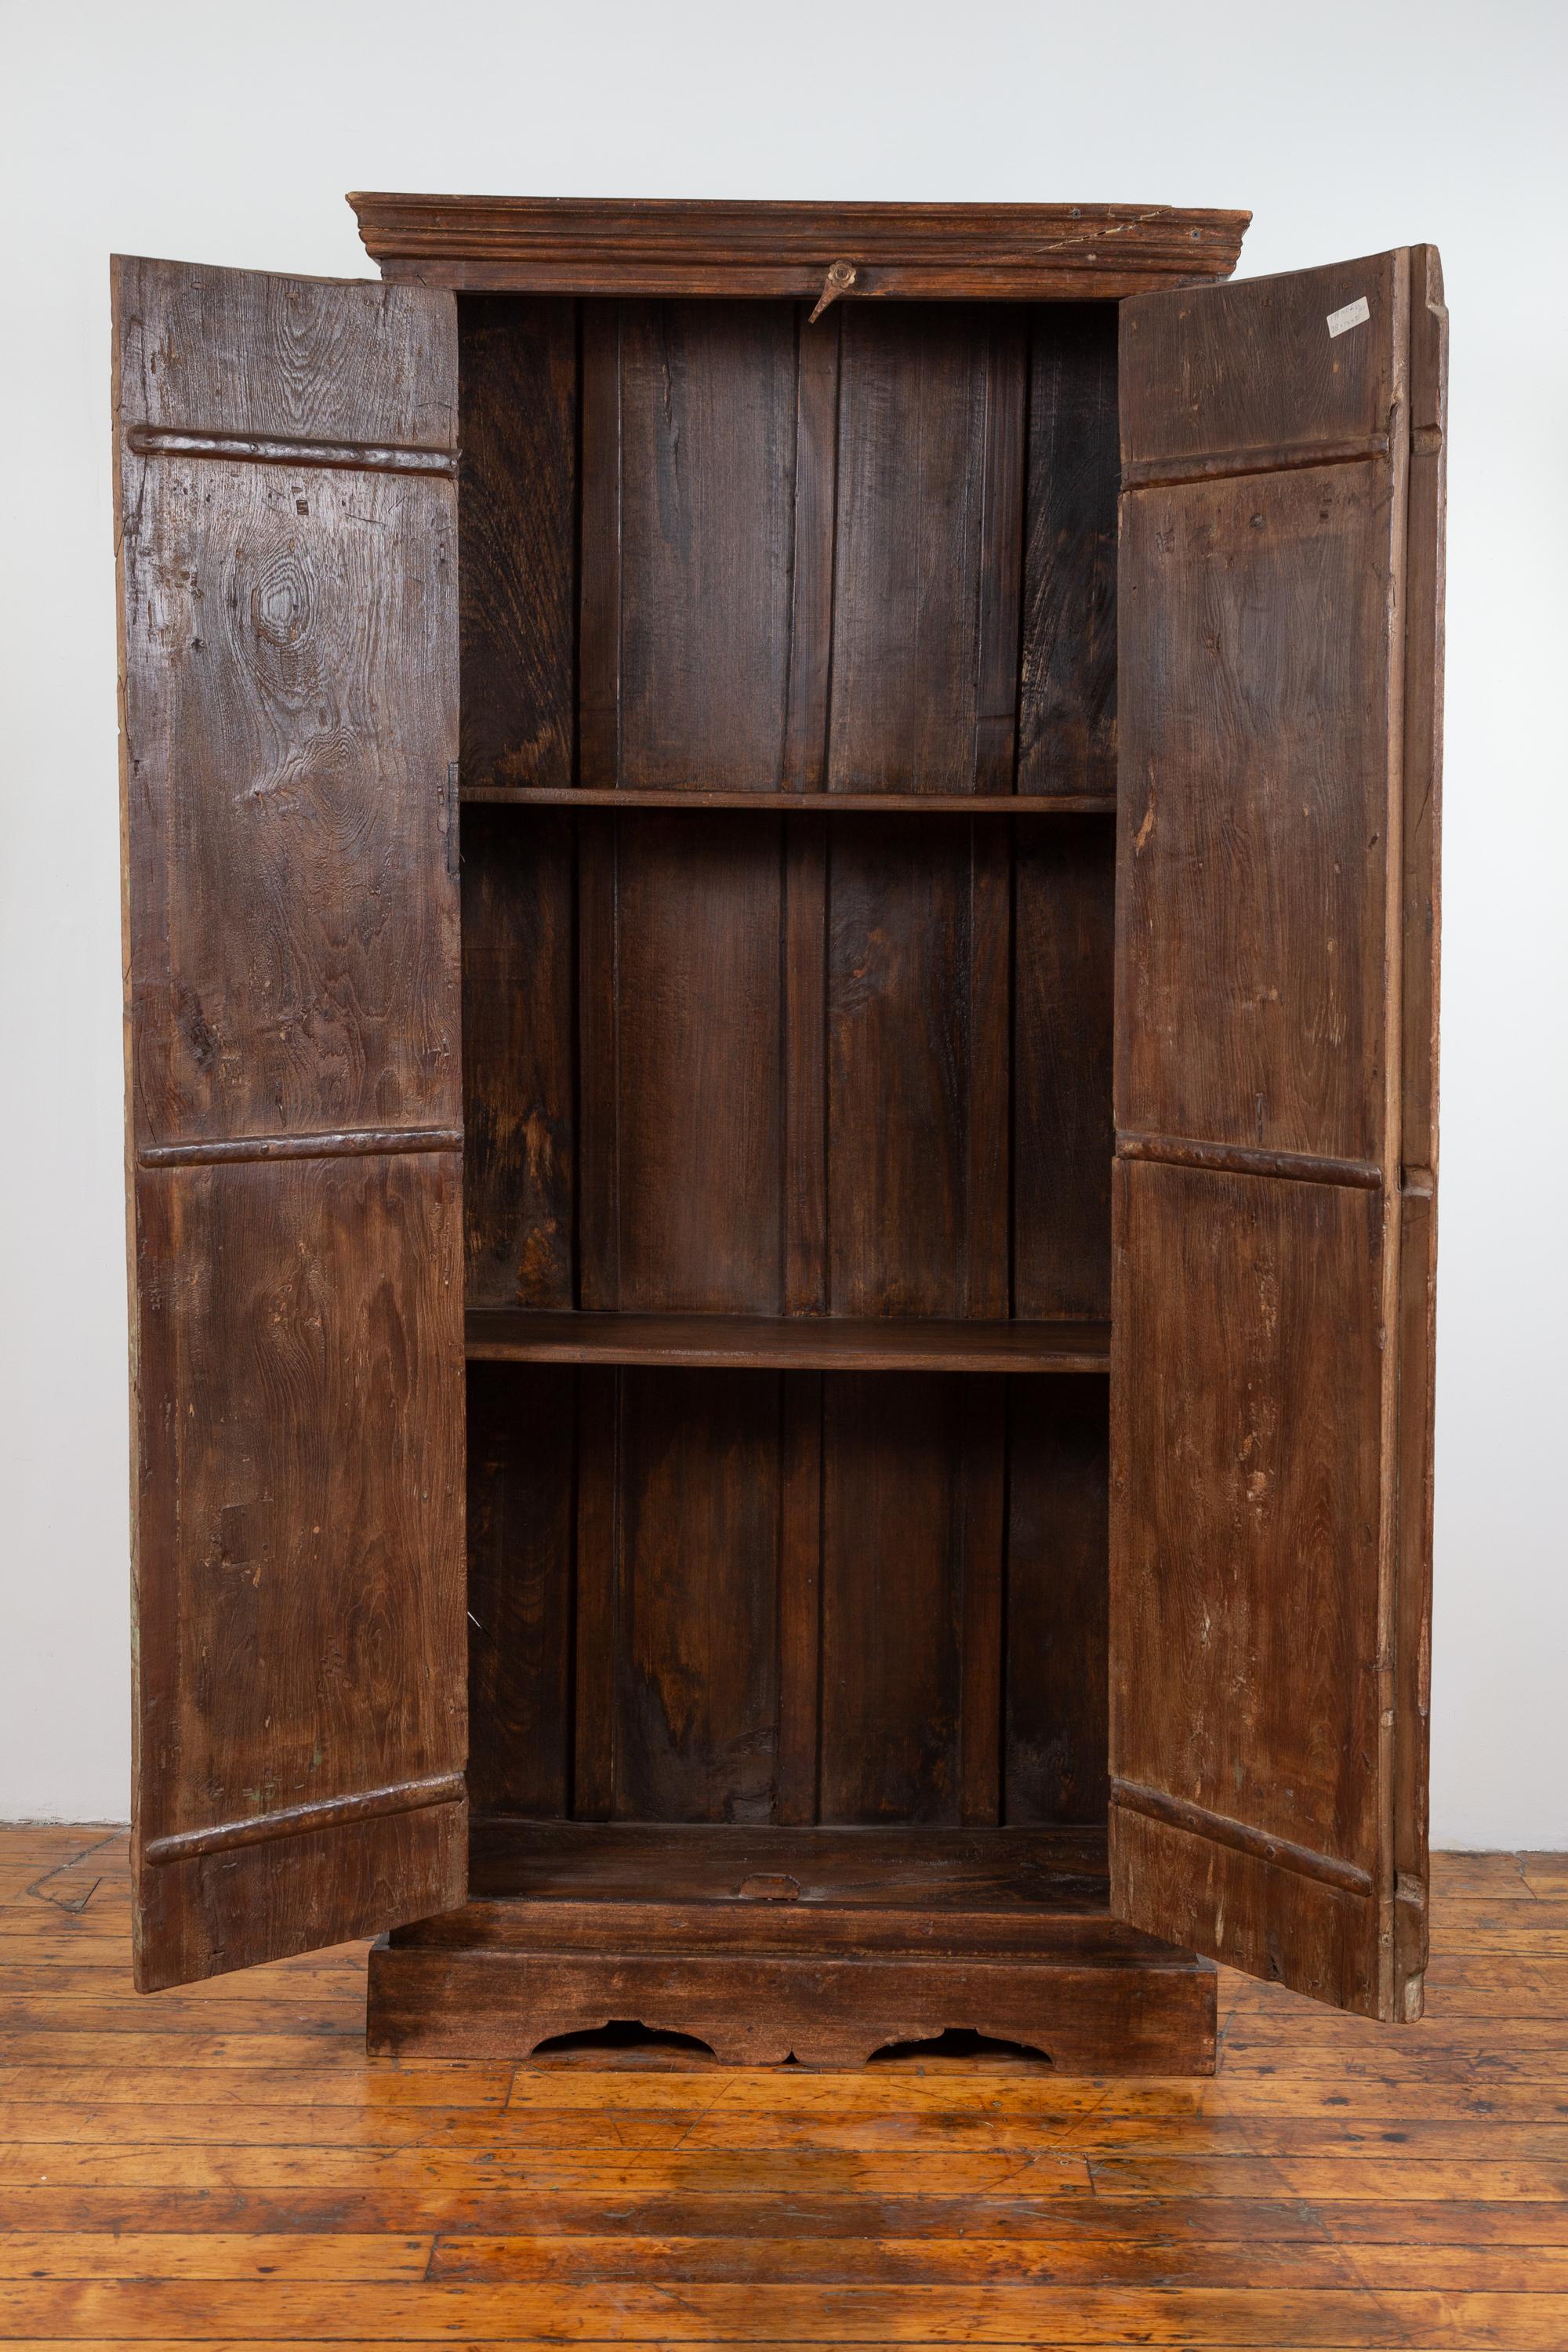 Indian Antique Wooden Armoire with Paneled Doors, Metal Braces and Aged Patina 10